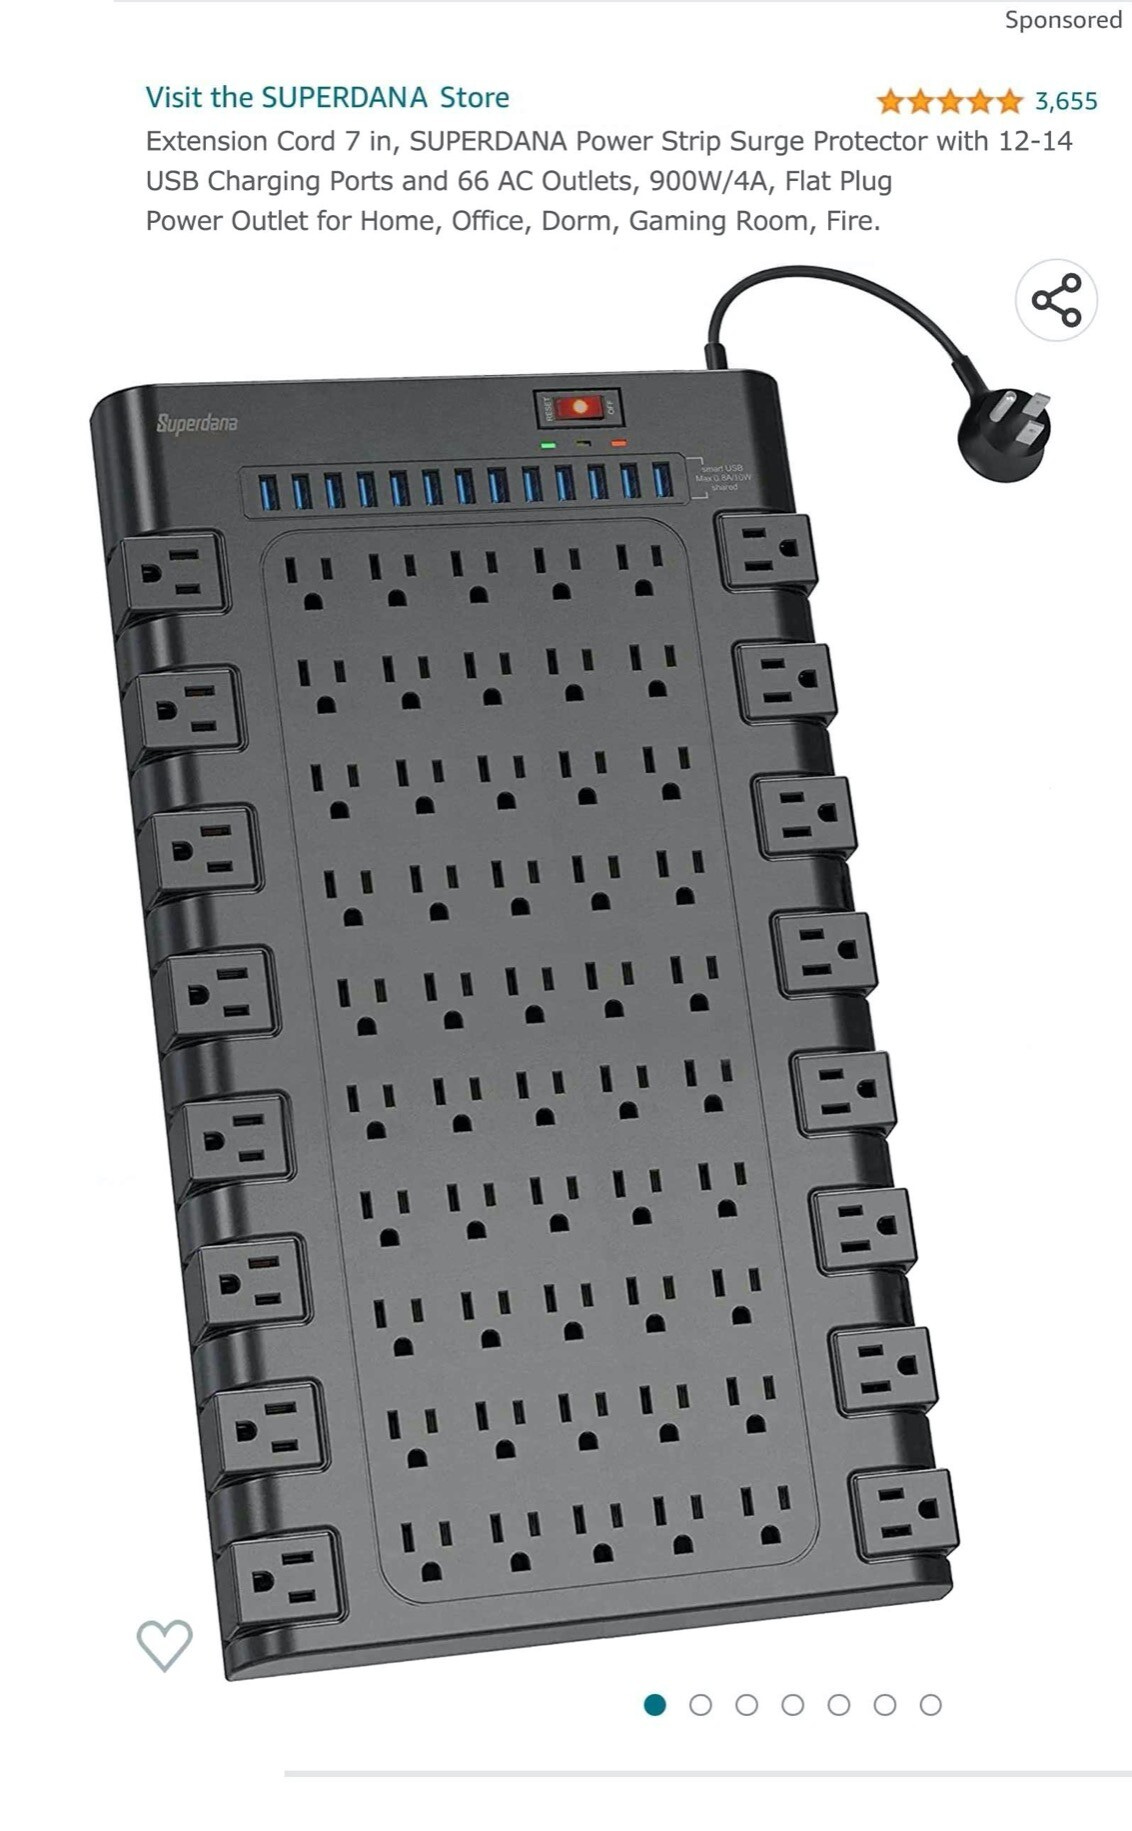 A picture of a powerboard with 12-14 USB charging ports and 66 AC outlets. It looks quite nice, it seems to have a good layout that would take both cables and wall warts, and it's also probably going to catch fire the first few minutes it's turned on. But it'll be a pleasingly designed fire.